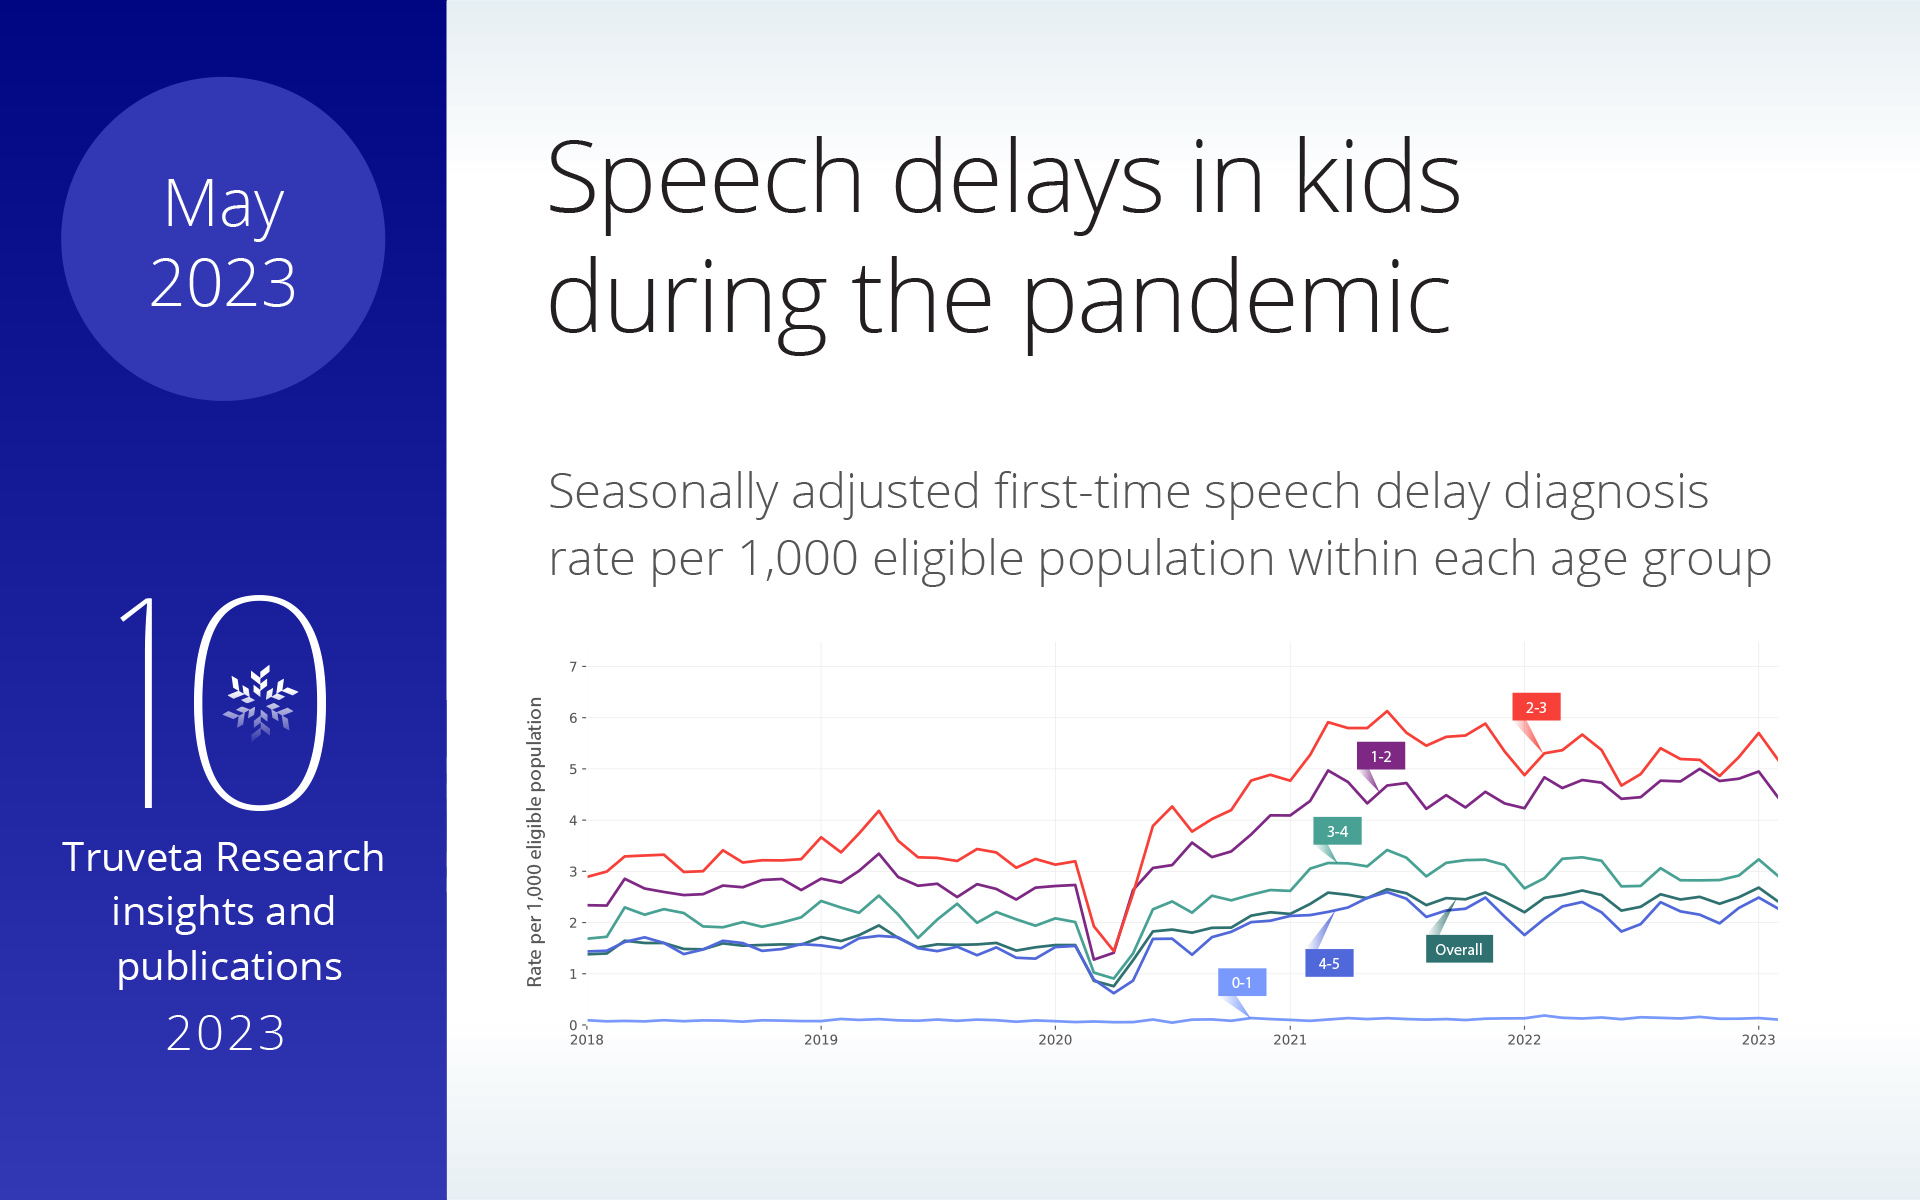 speech delay increase in children under age of 5 following the pandemic